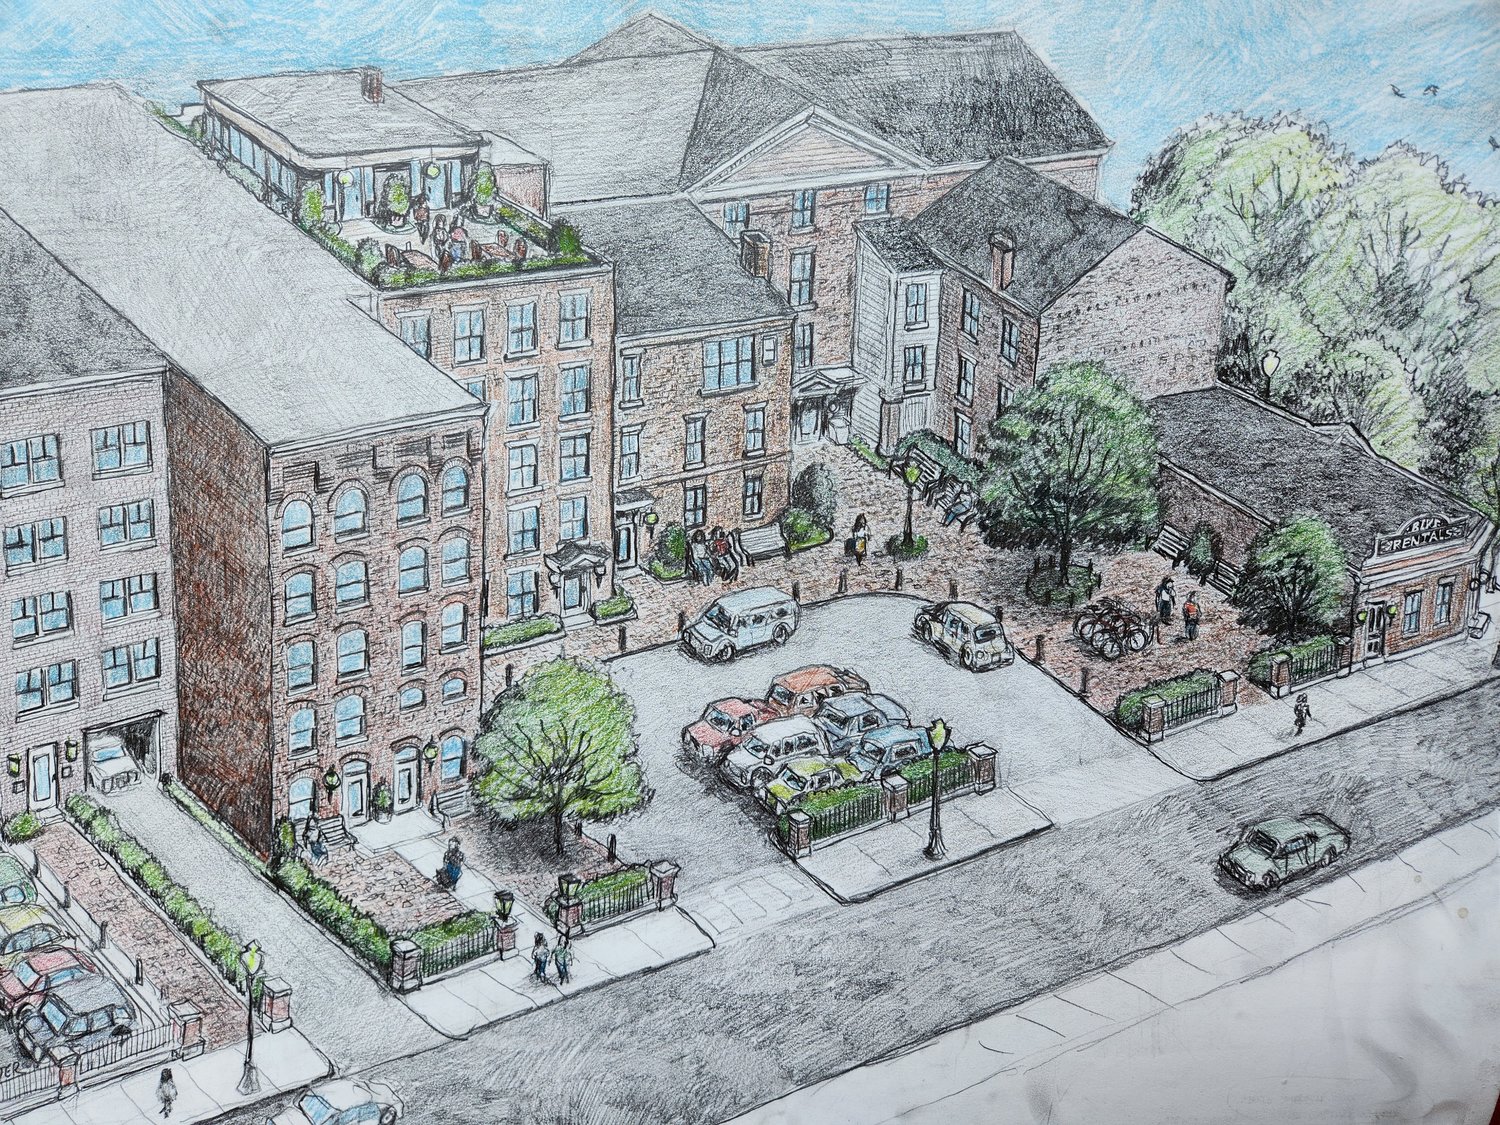 An illustration of what ​​​​​​Utica Mechanics Hall could look like is shown in this artist’s rendering. The project would be located in the Lower Genesee Historic District. With a budget of $18.5 million, the project is expected to include up to 58 market rate residential units, commercial space and dedicated parking.